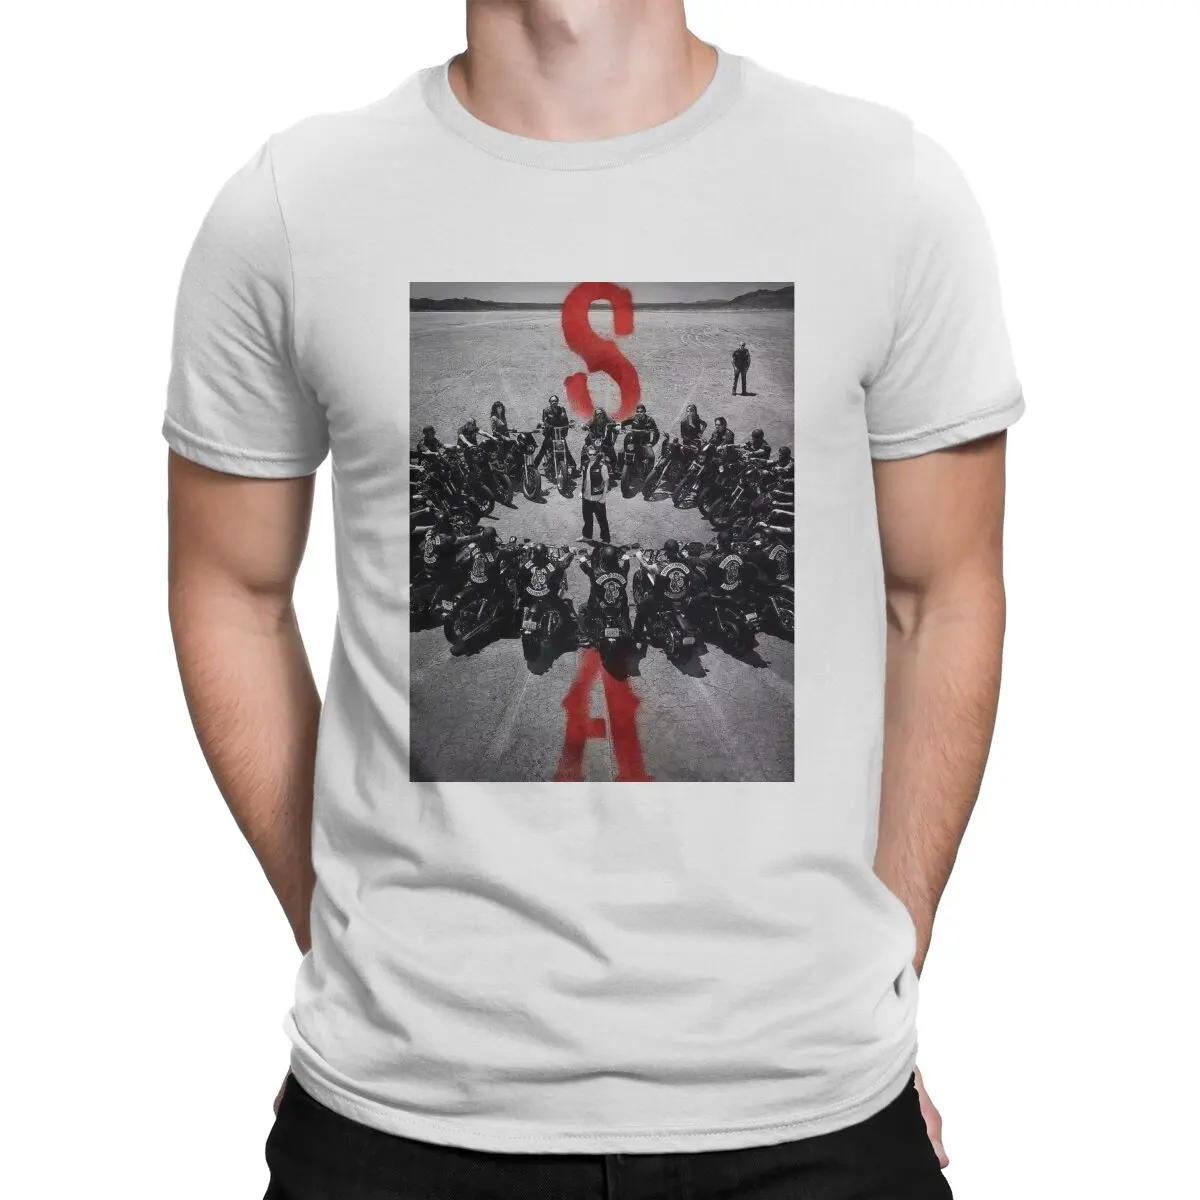 S-Sons Of Anarchy Newest TShirt for Men Club Round Collar Pure Cotton T Shirt Hip Hop Birthday Gifts Tops 